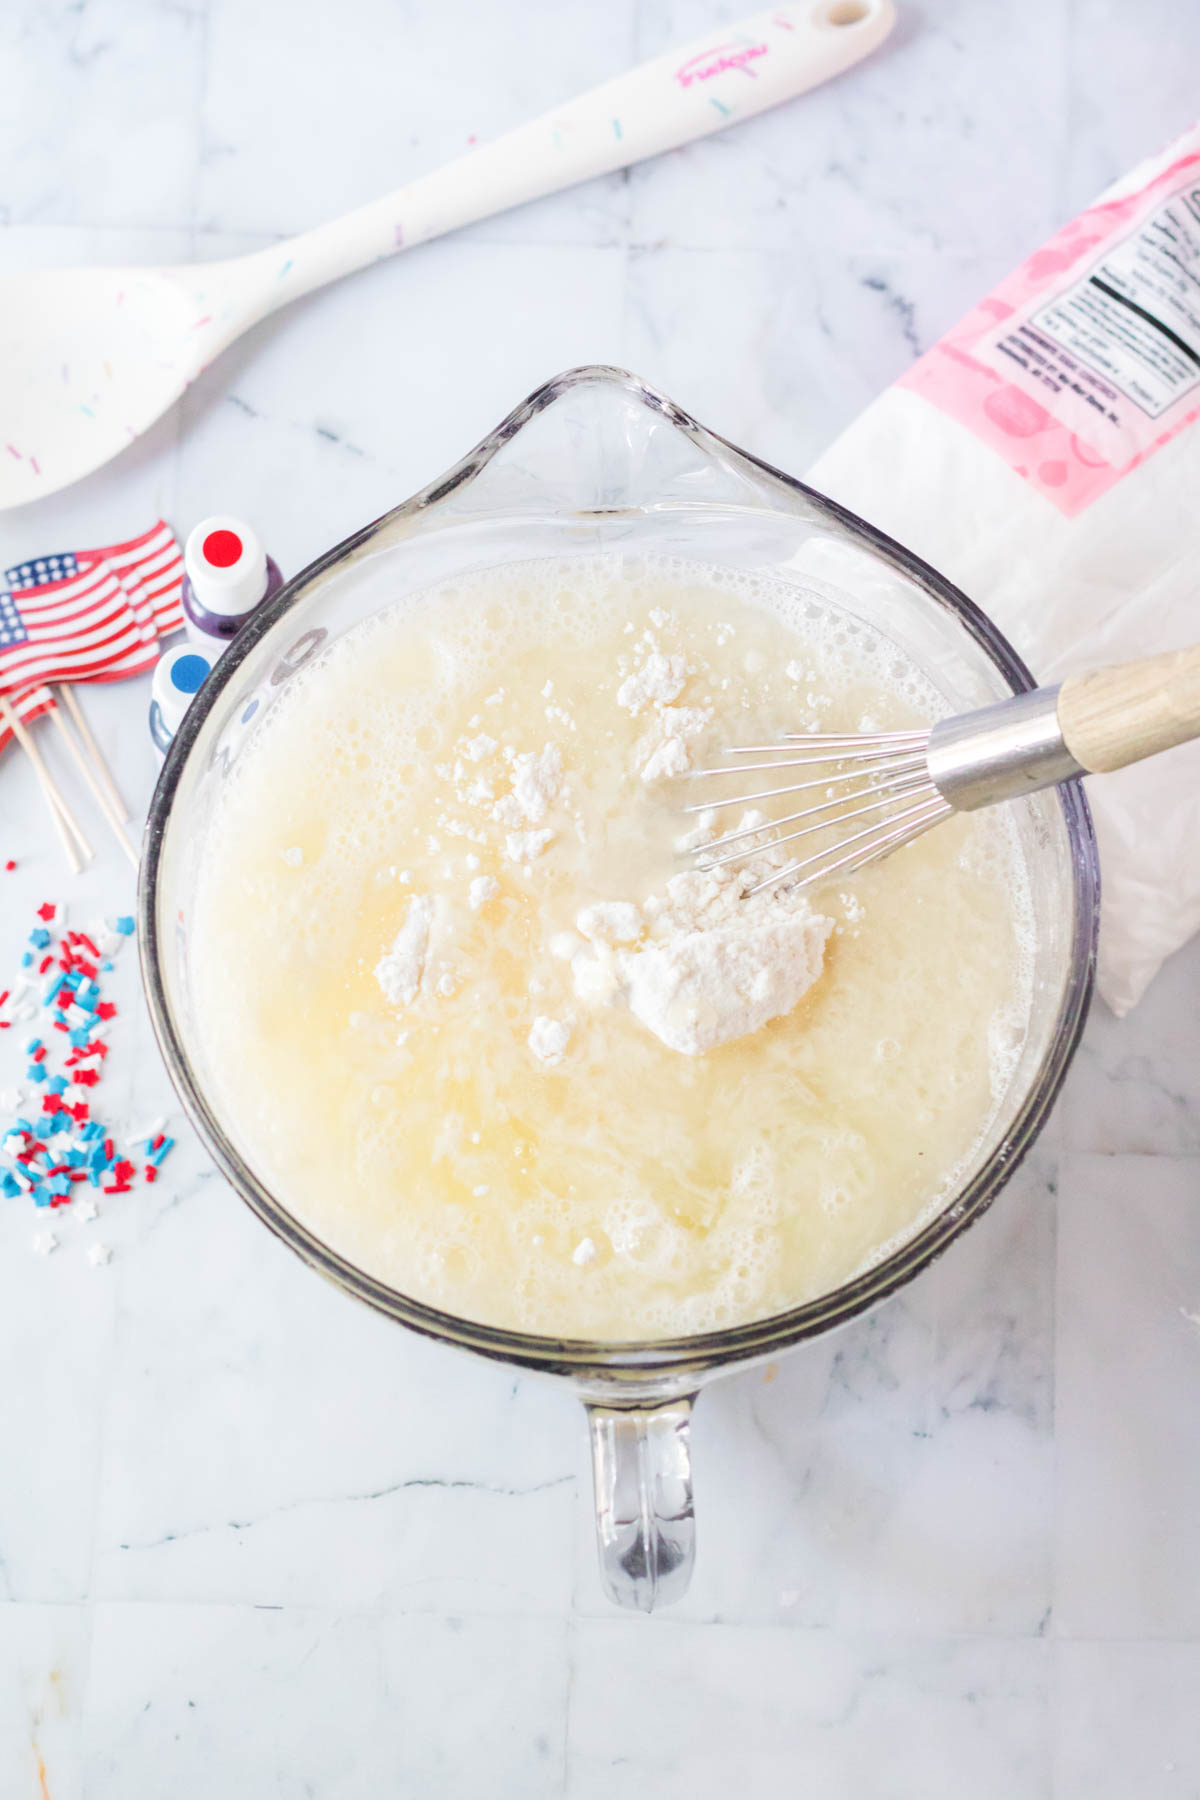 white cake mix in a glass mixing bowl